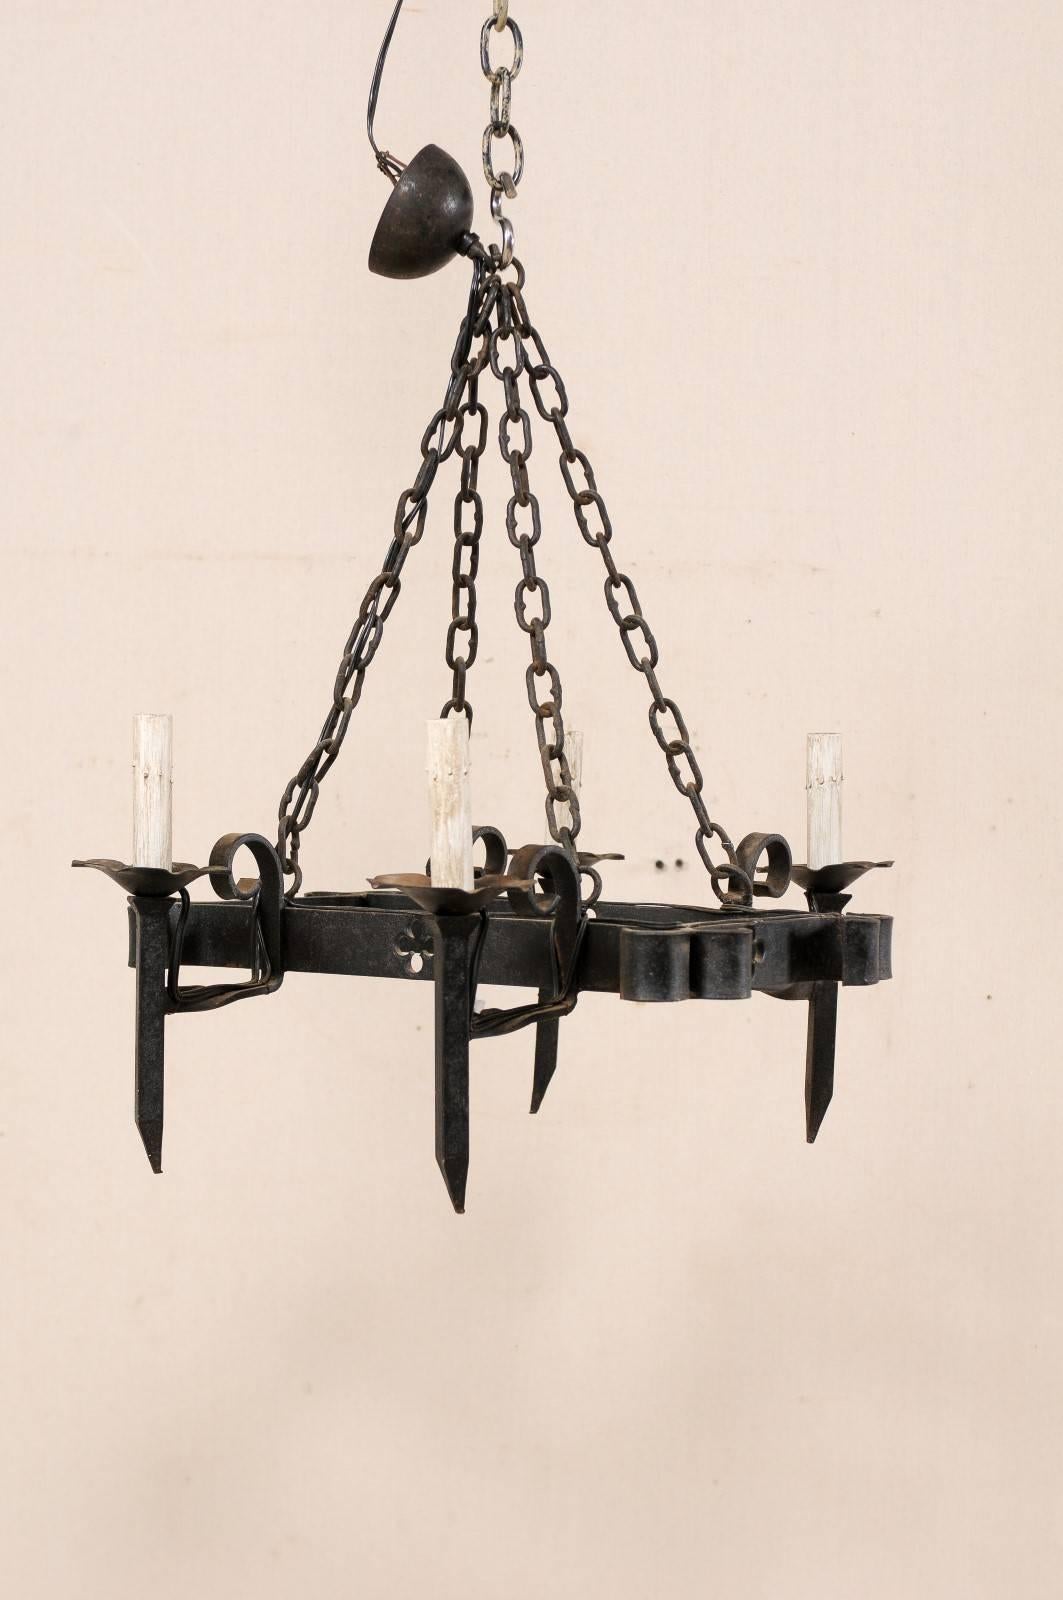 Vintage French Forged Iron Black Chandelier with Pierced Clover Motif Pattern In Good Condition For Sale In Atlanta, GA